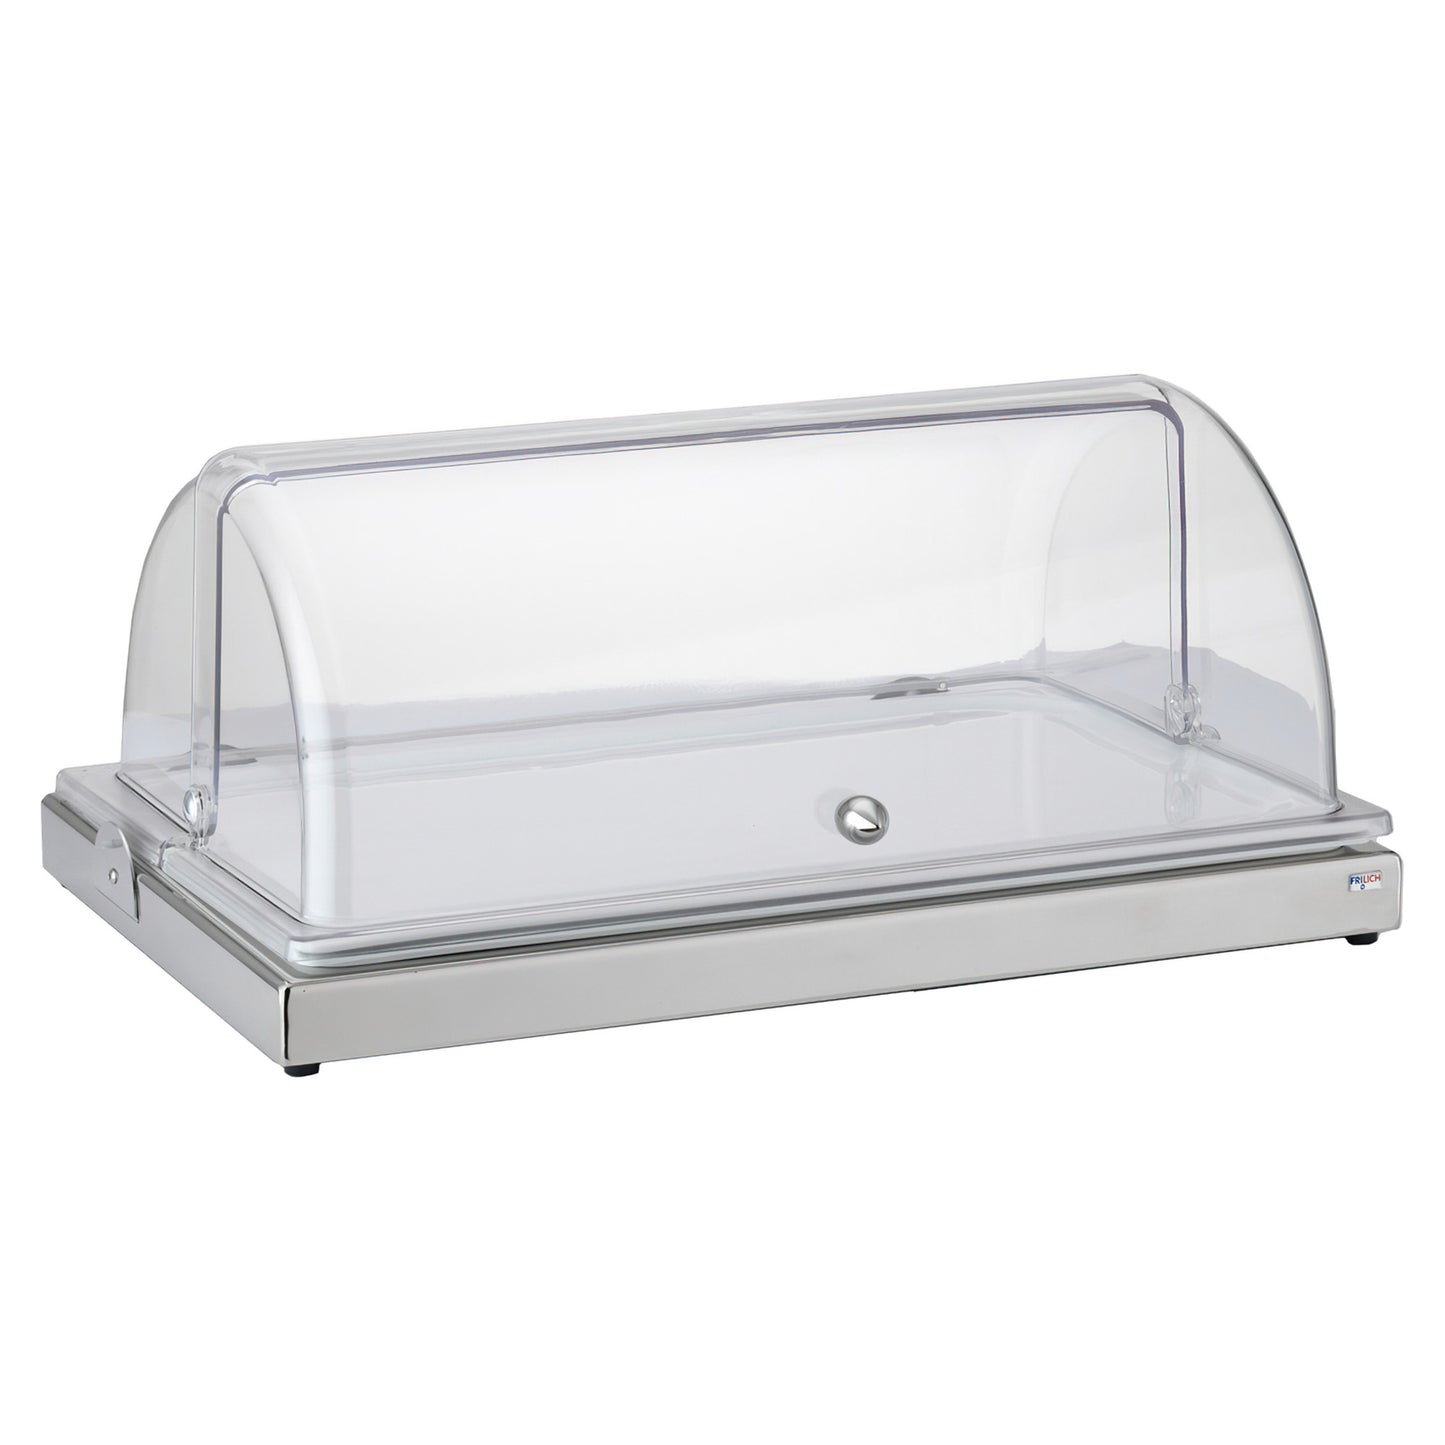 Full Size Rectangular Cold Food Display Set. Includes Stainless Steel Base, Plastic Inset Tray, 6 Cooling Packs, and White China Plate. 21.6" x 13.7", 2.2" tall. FRILICH EFC000E019 UNISON (Fits 10078 Dome Cover)